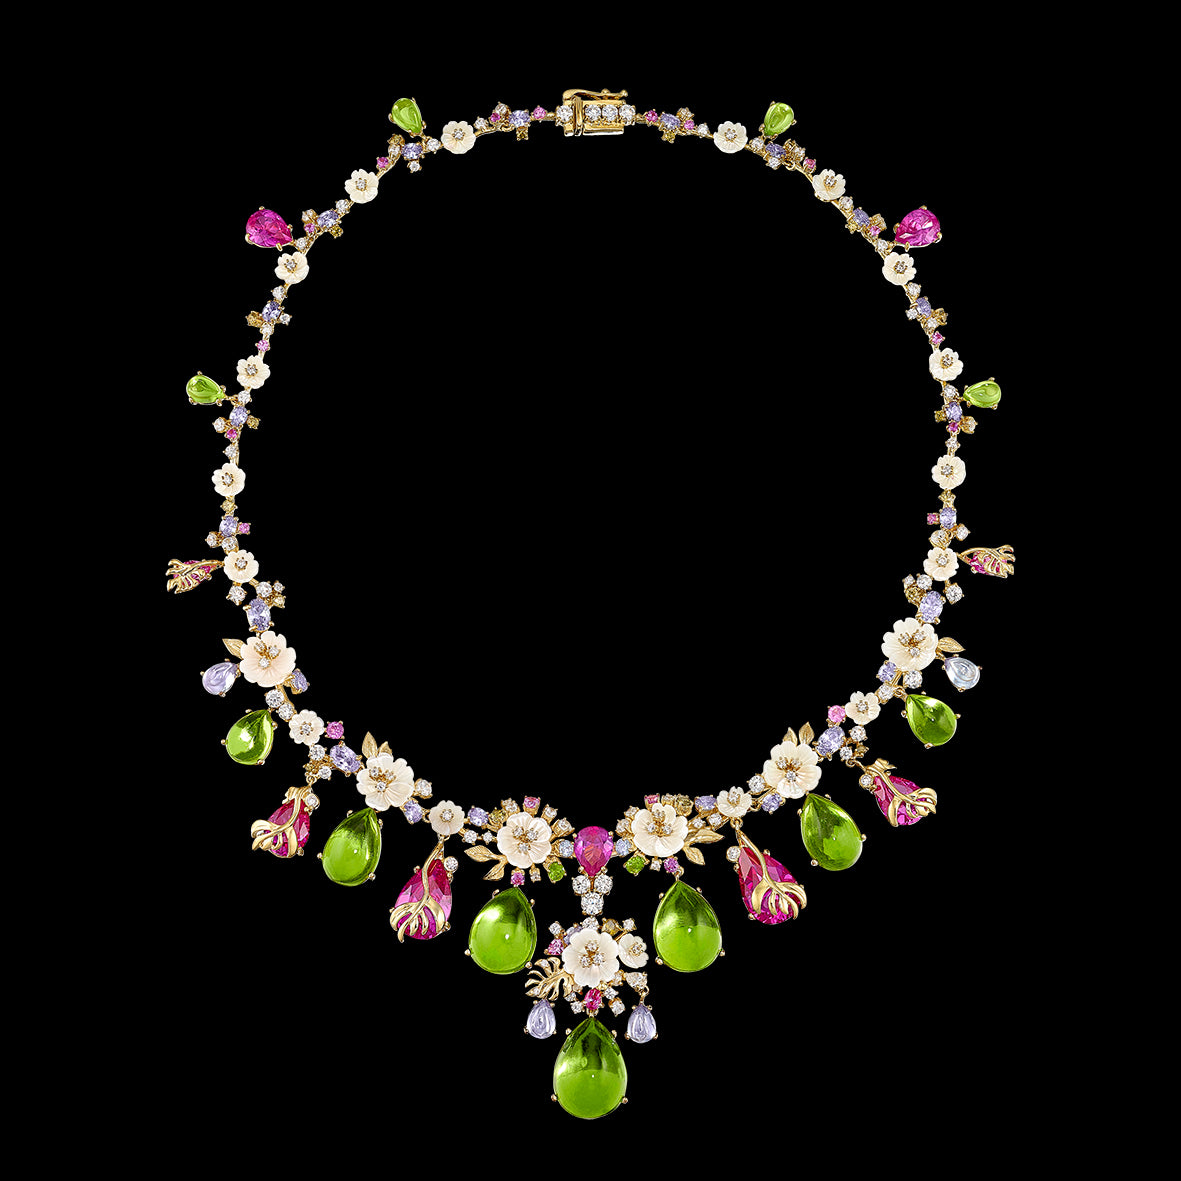 Peridot Paradise Necklace, Necklace, Anabela Chan Joaillerie - Fine jewelry with laboratory grown and created gemstones hand-crafted in the United Kingdom. Anabela Chan Joaillerie is the first fine jewellery brand in the world to champion laboratory-grown and created gemstones with high jewellery design, artisanal craftsmanship and a focus on ethical and sustainable innovations.